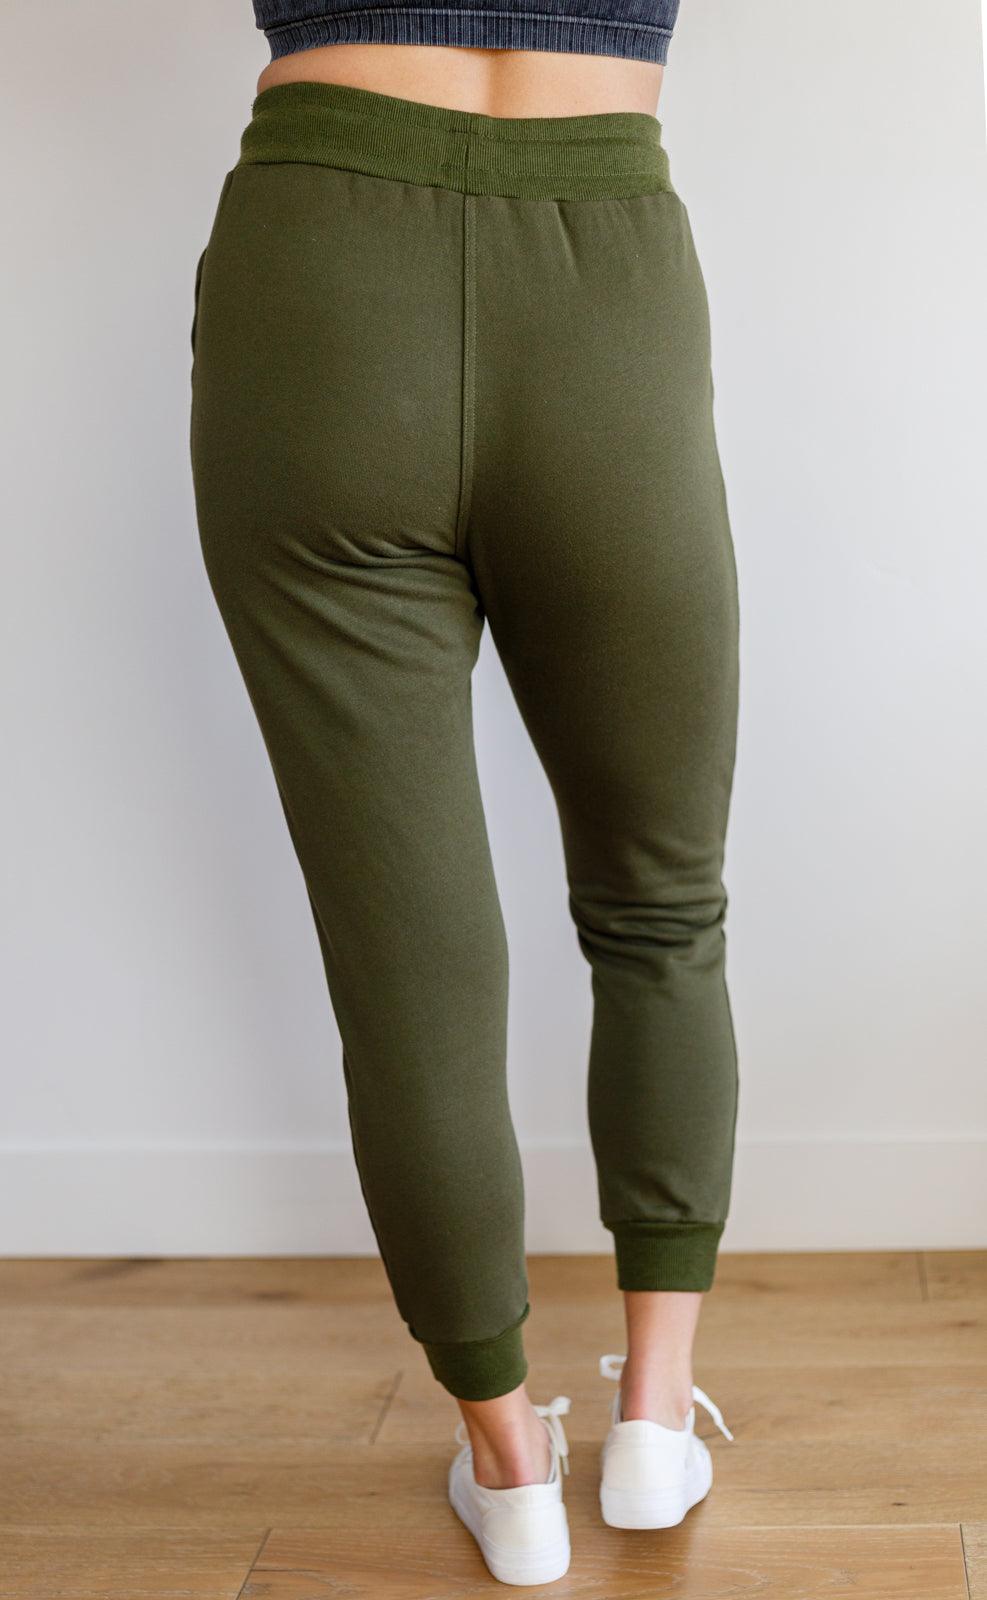 Distressed Joggers in Olive - Studio 653